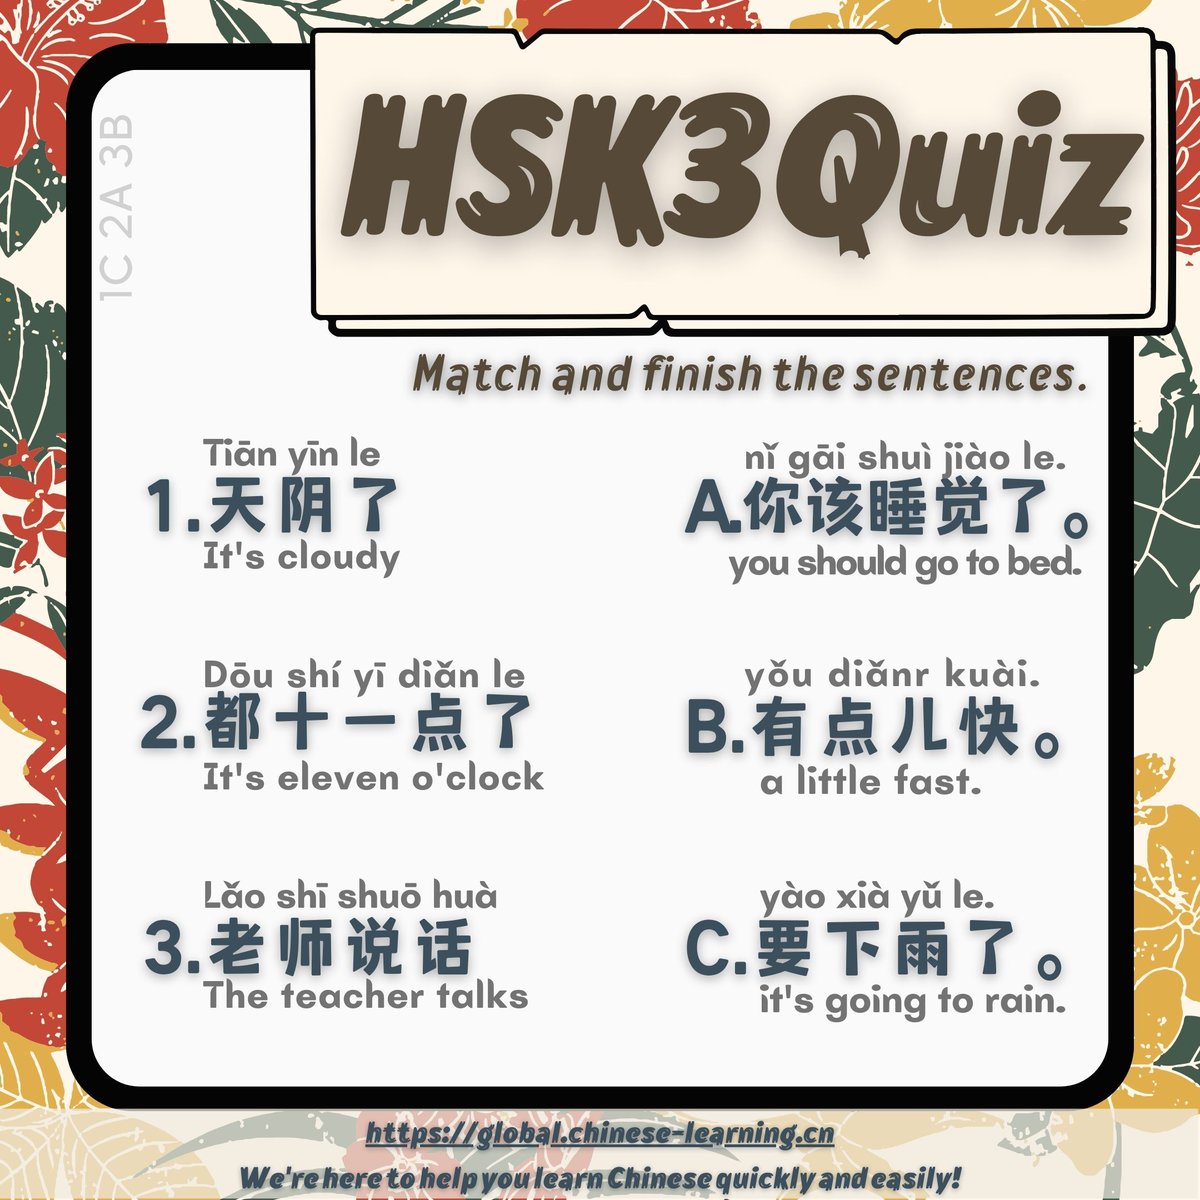 HSK3 Quiz  Match and finish the sentences #HSK #studytwt #Chineselearning #Chinese #hsktest #Chinese #学中文 #Chineselearning #学汉语